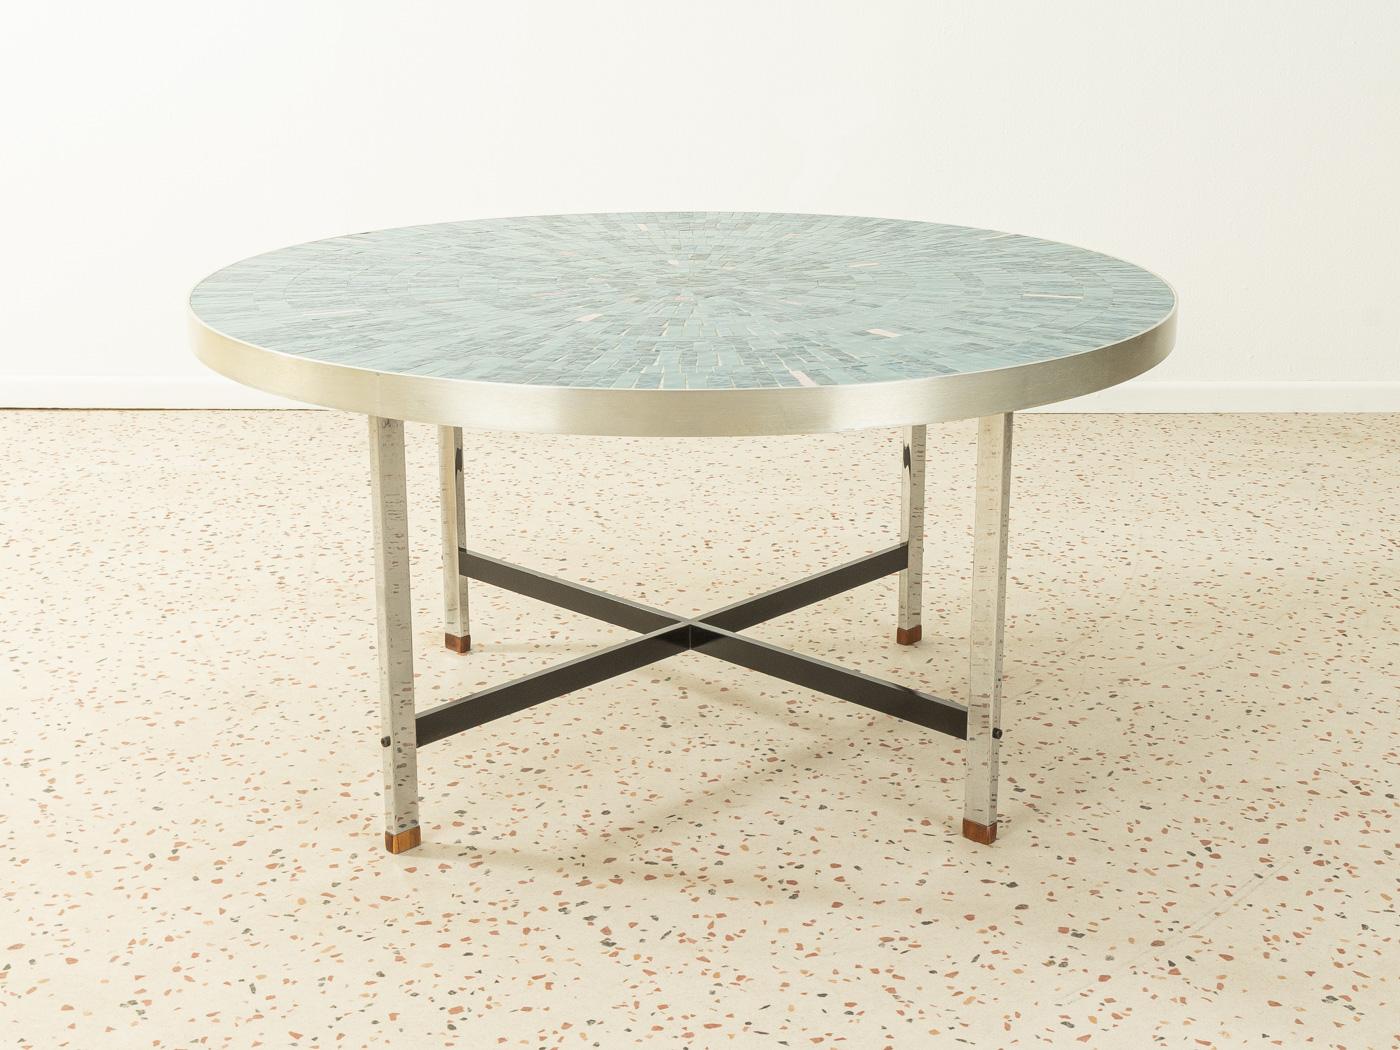 Mid-20th Century Berthold Müller-oerlinghausen Mosaic Coffee Table, Turquoise and Grey, 1960s